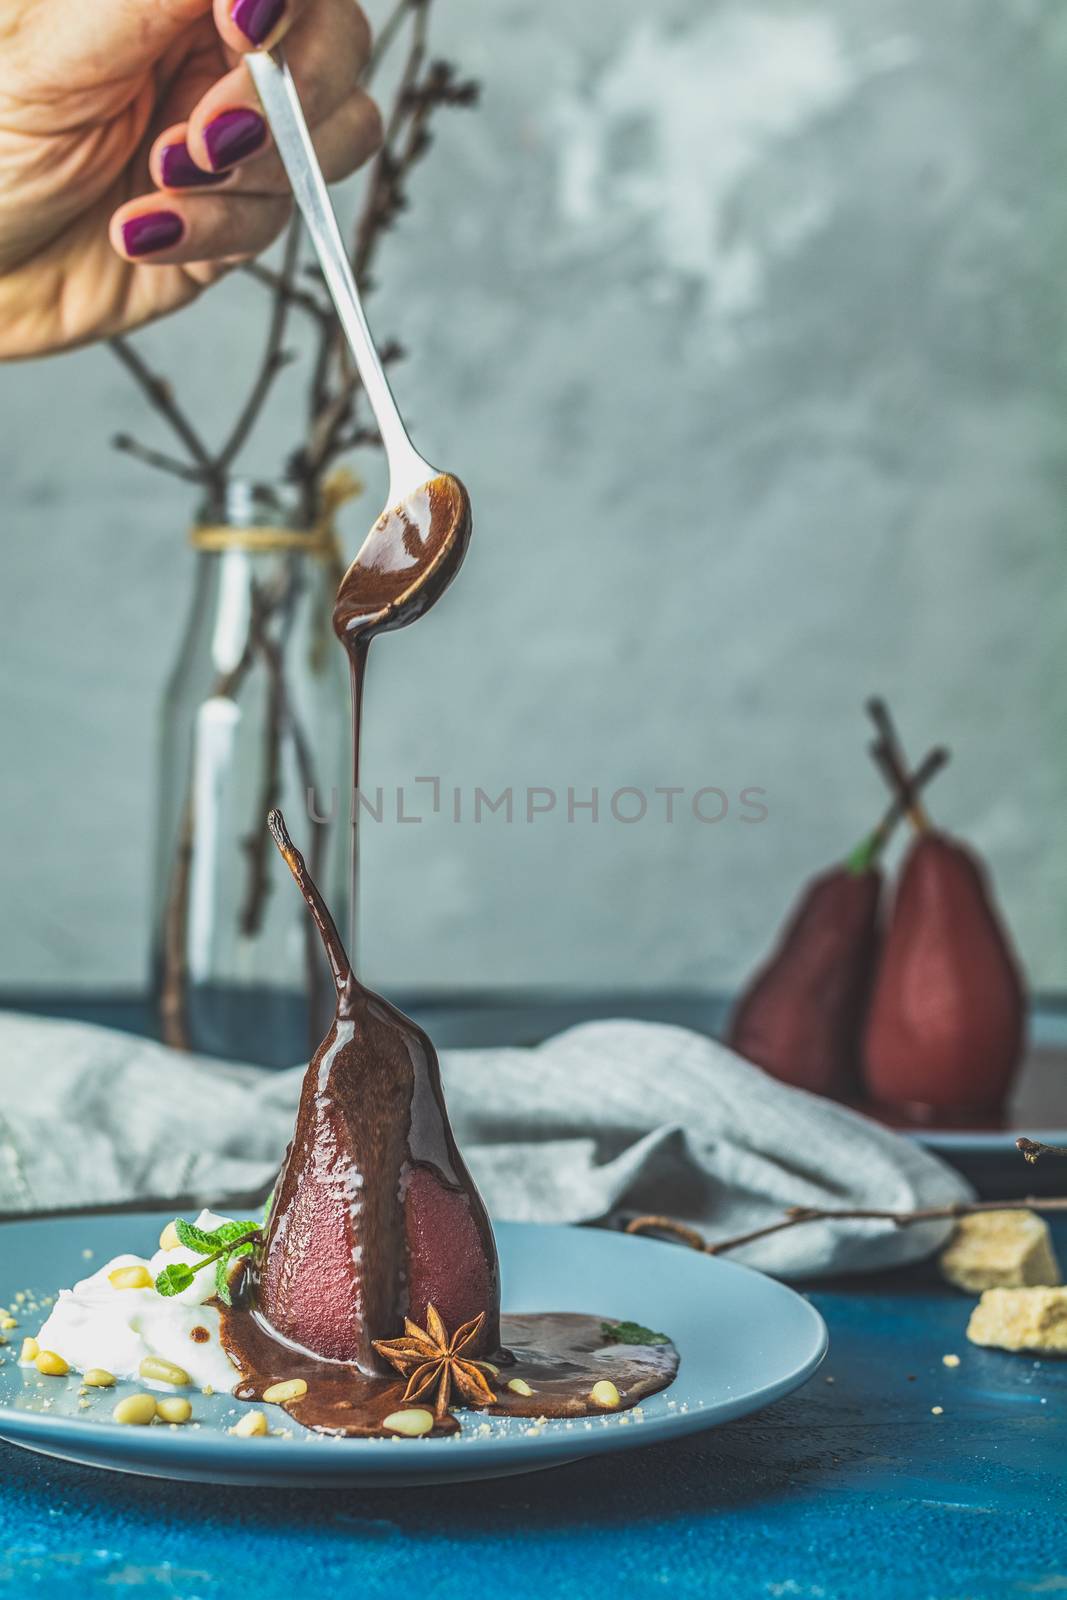 Chocolate sauce pours from a spoon on red pears in wine. Red pears are in a blue plate. The concept of still life on blue concrete surface